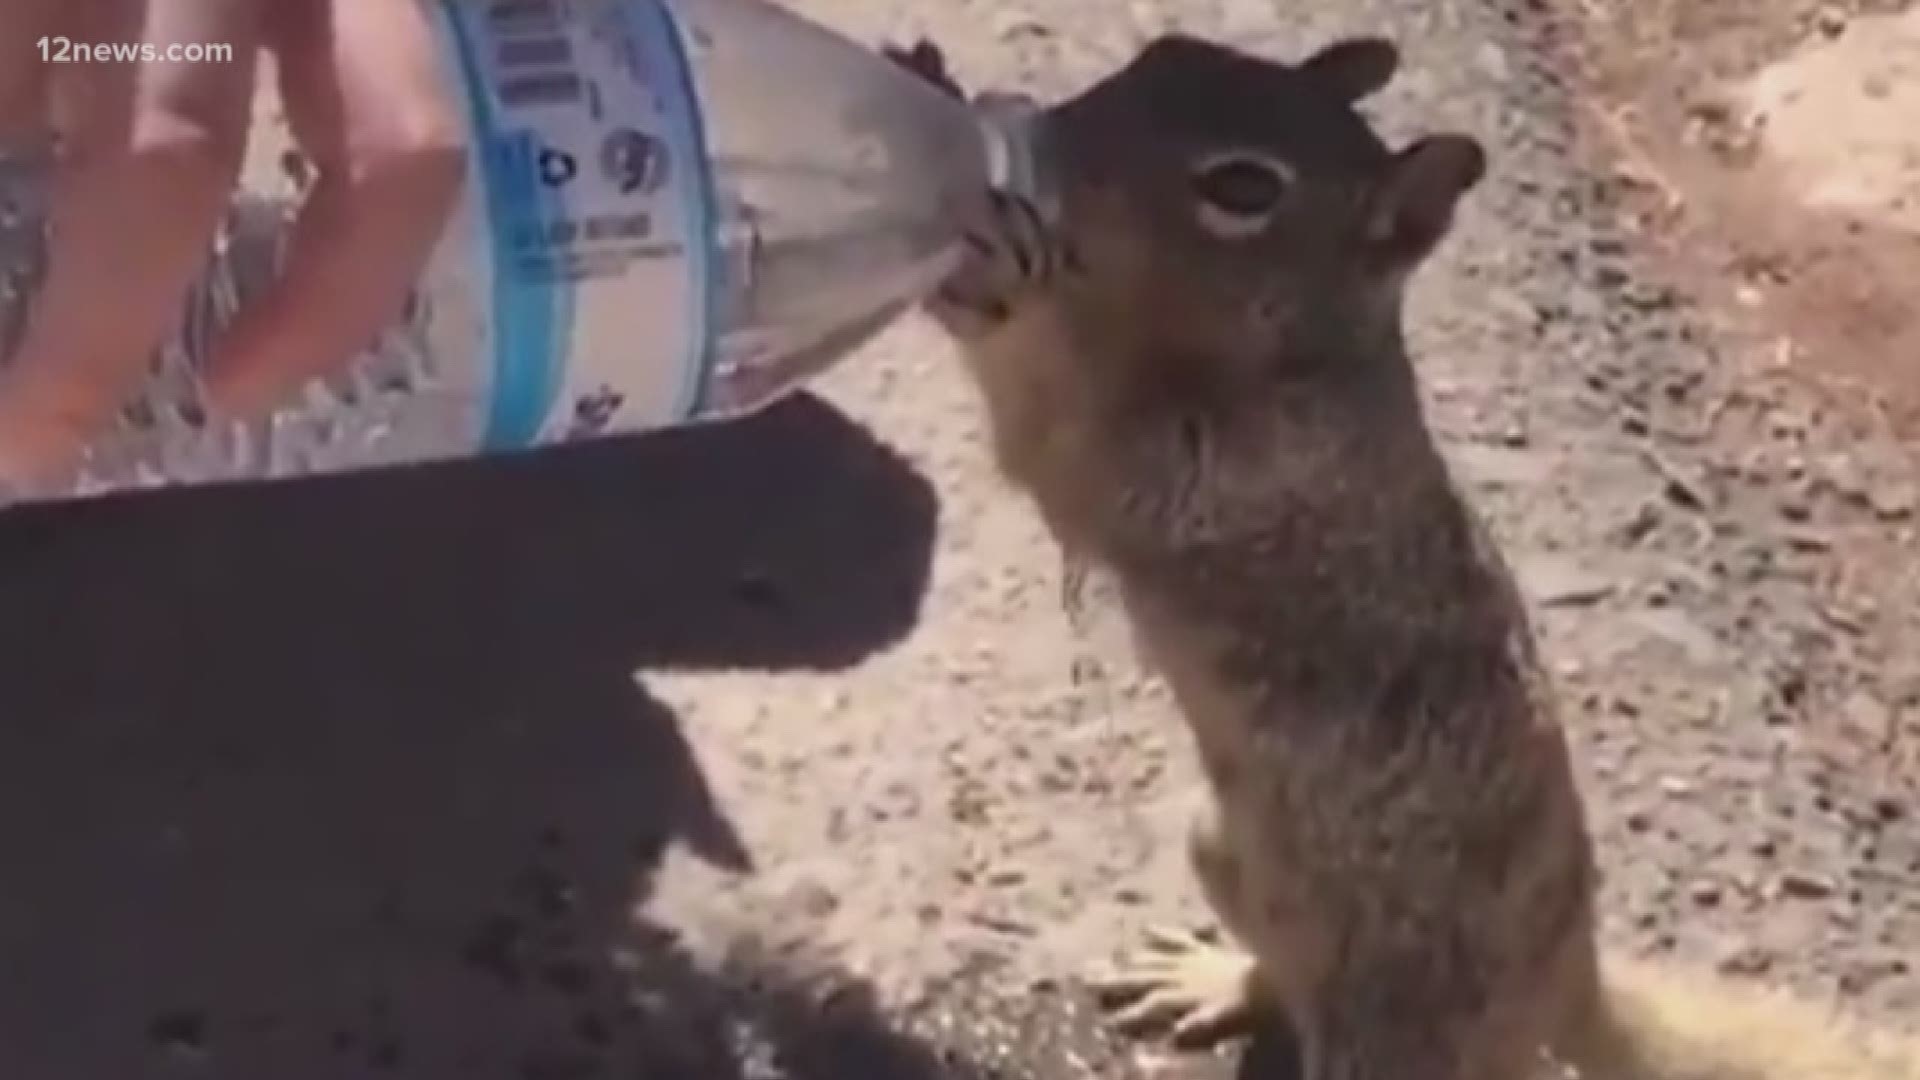 A viral video of a man giving water to a squirrel has gone viral. Park rangers are reminding you why it's bad to feed or give water to wildlife.